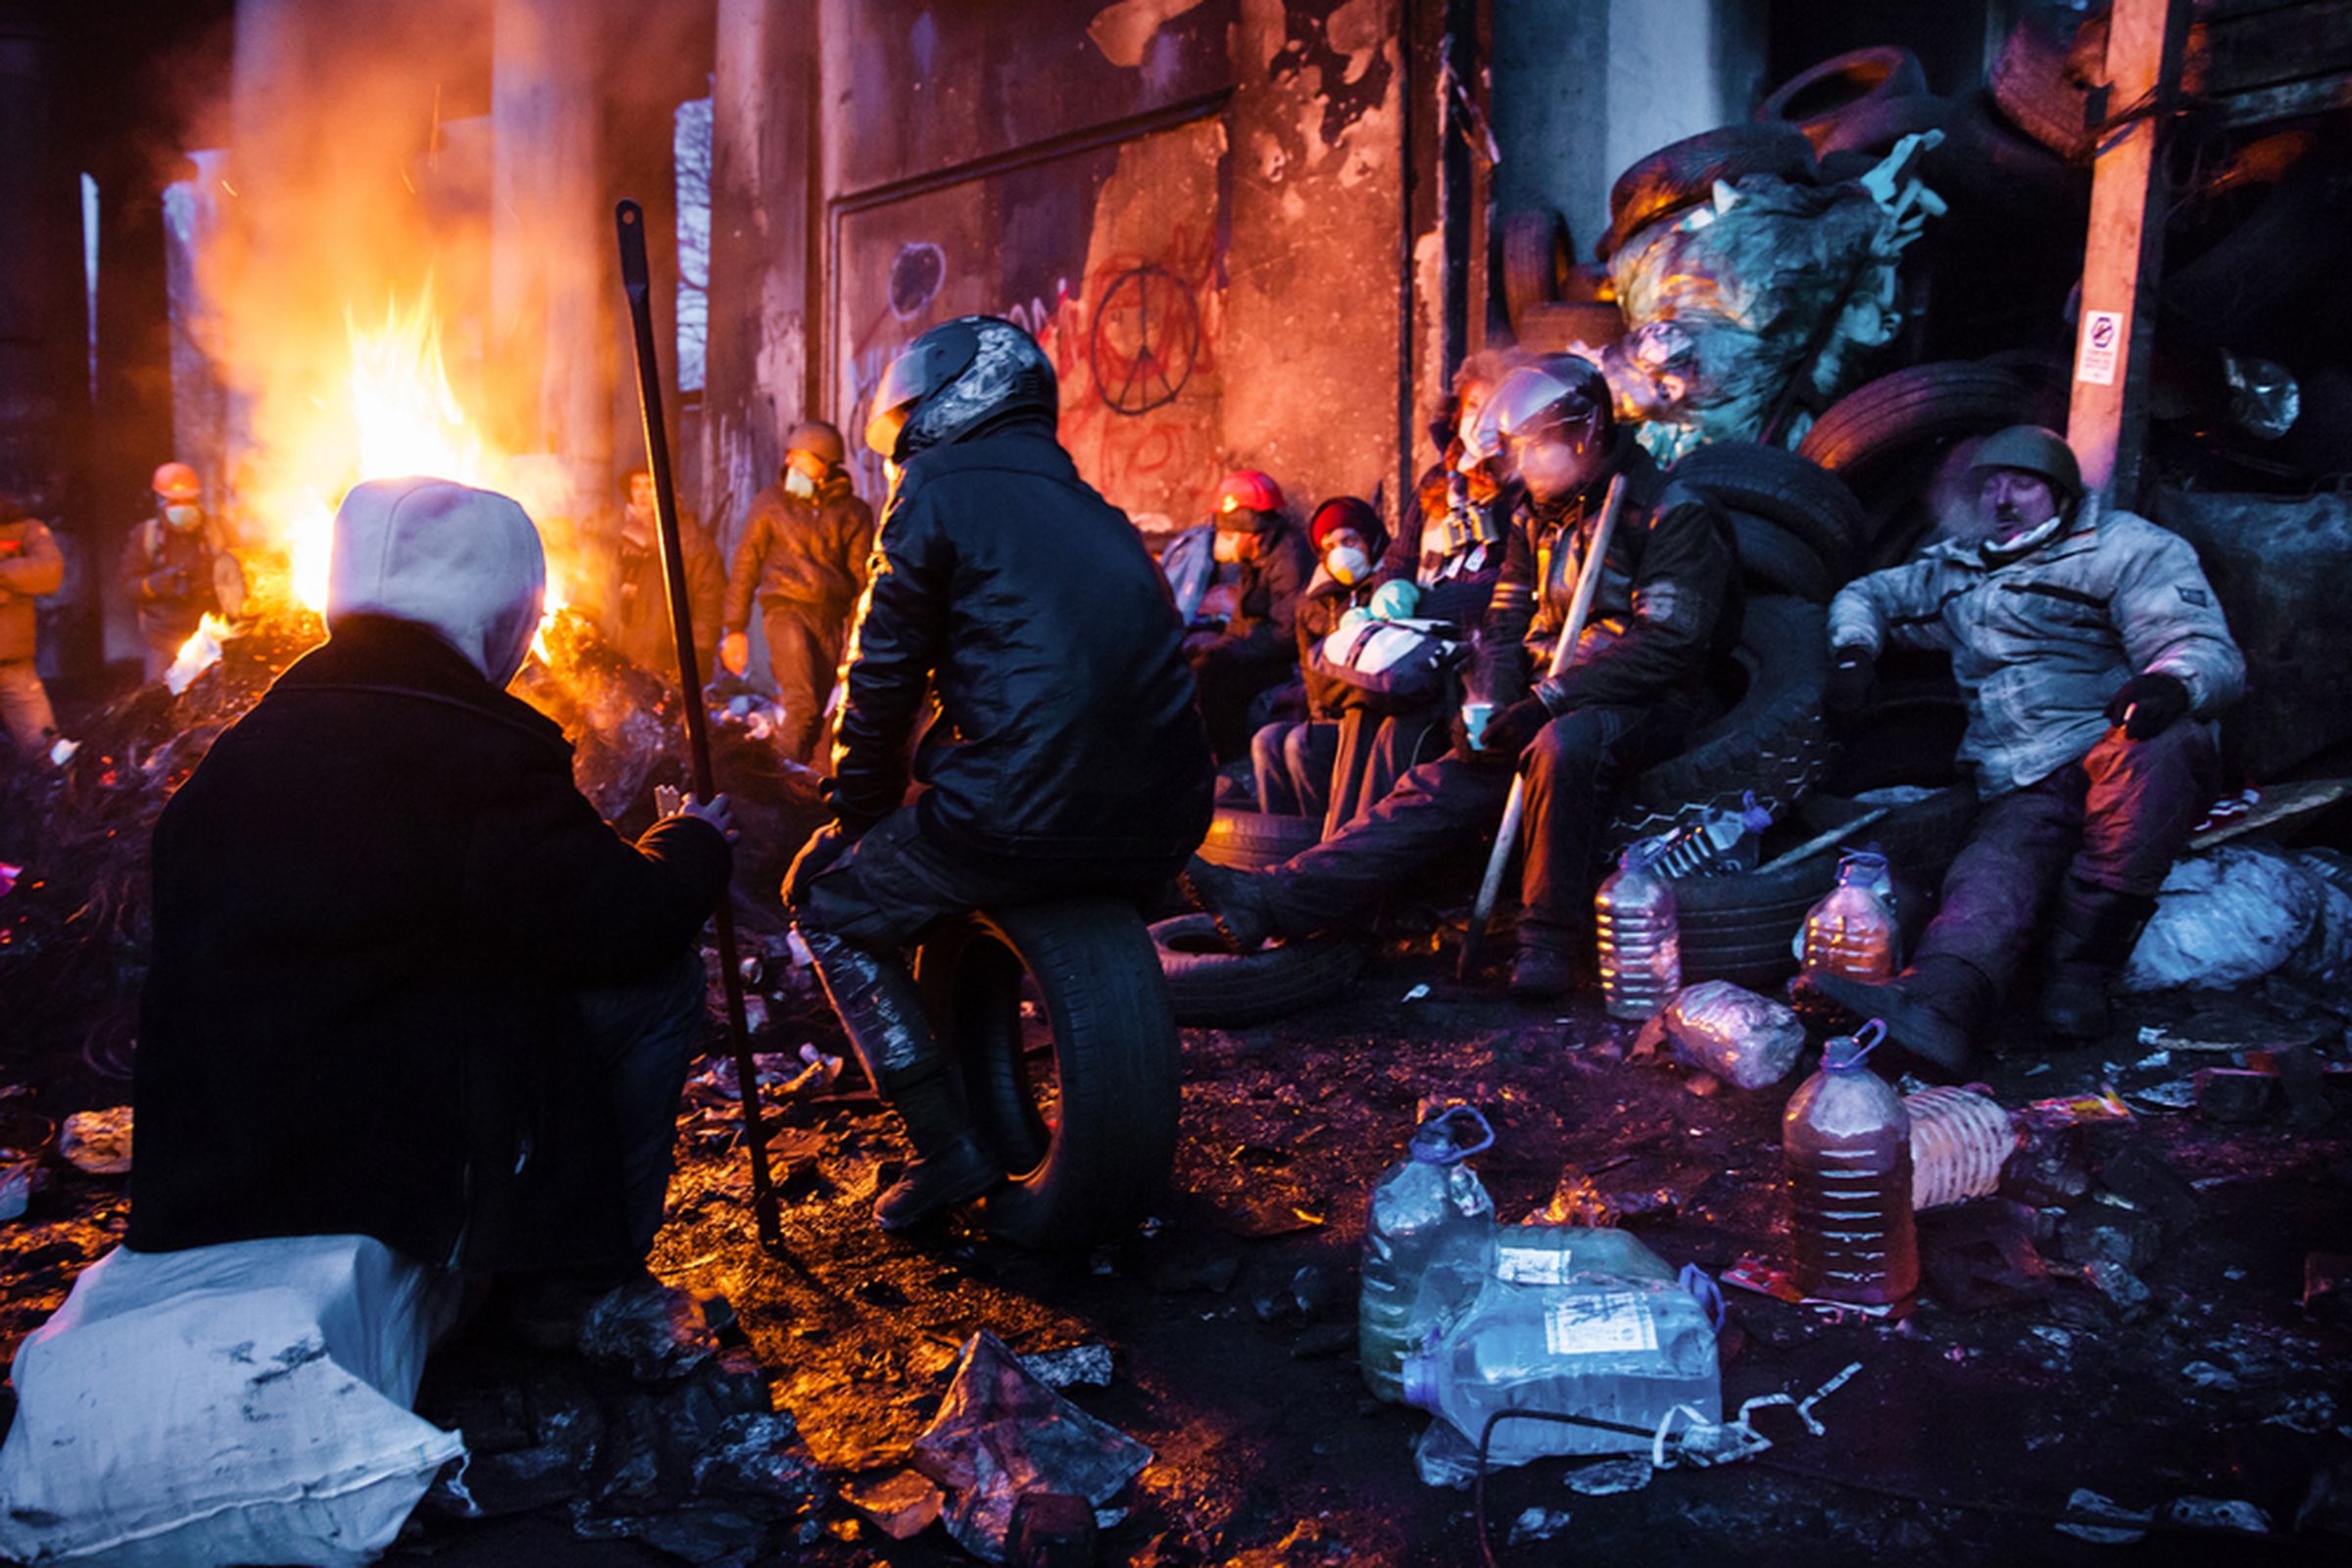 Euromaidan protesters rest and strengthen their barricades on Hrushevskoho Street after another night of clashes with riot police in Kiev, Ukraine.